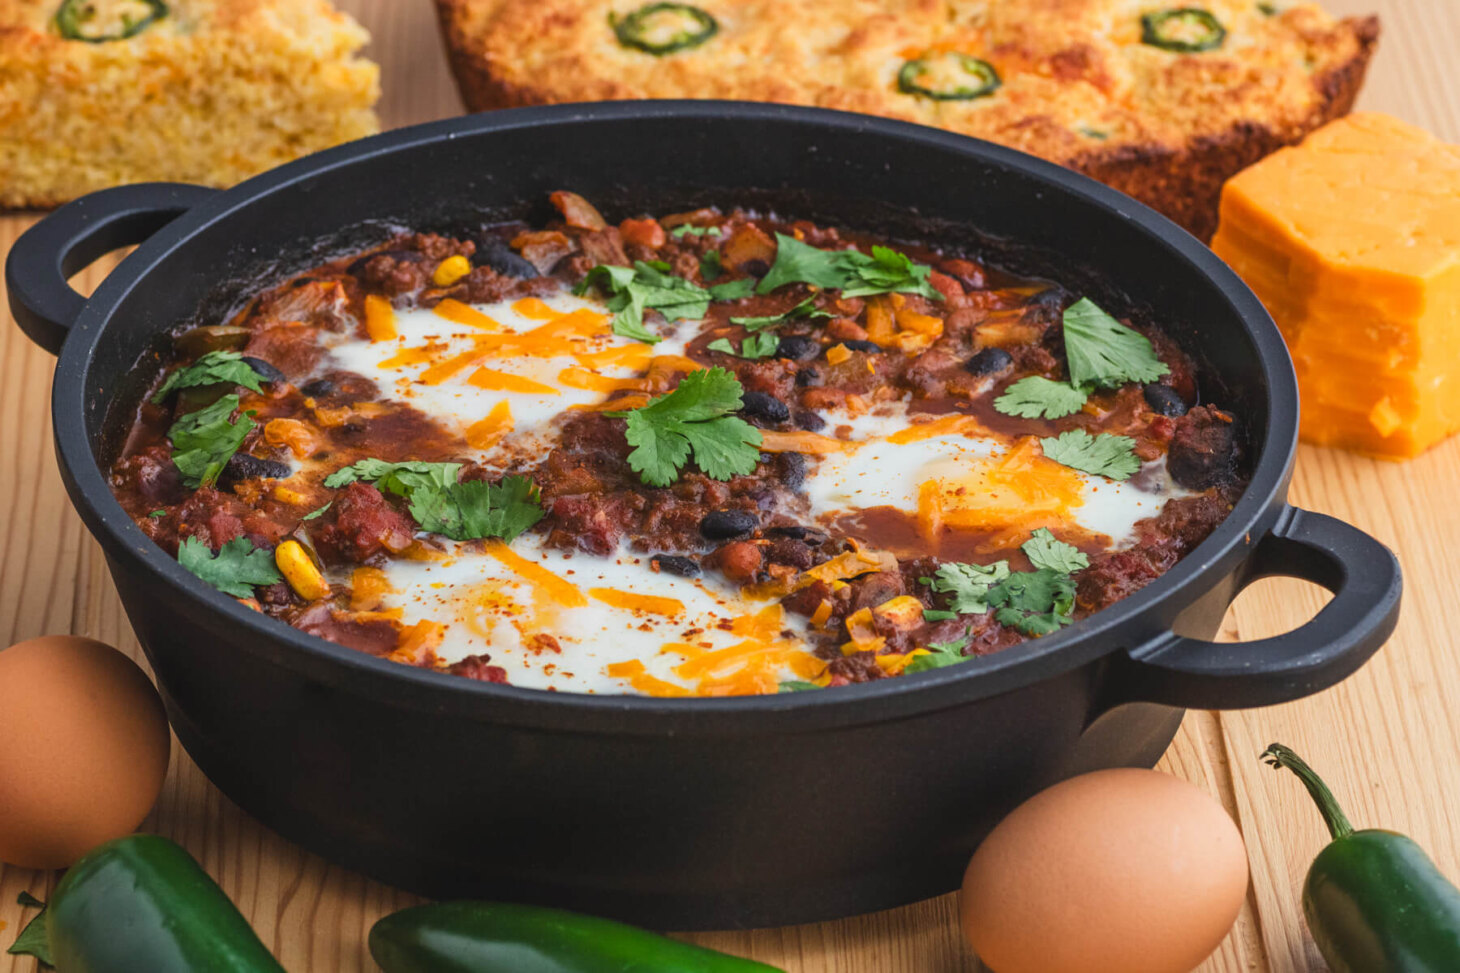 A cast iron skillet full of baked chili and eggs surrounded by cornbread, cheddar cheese, eggs, and jalapenos.